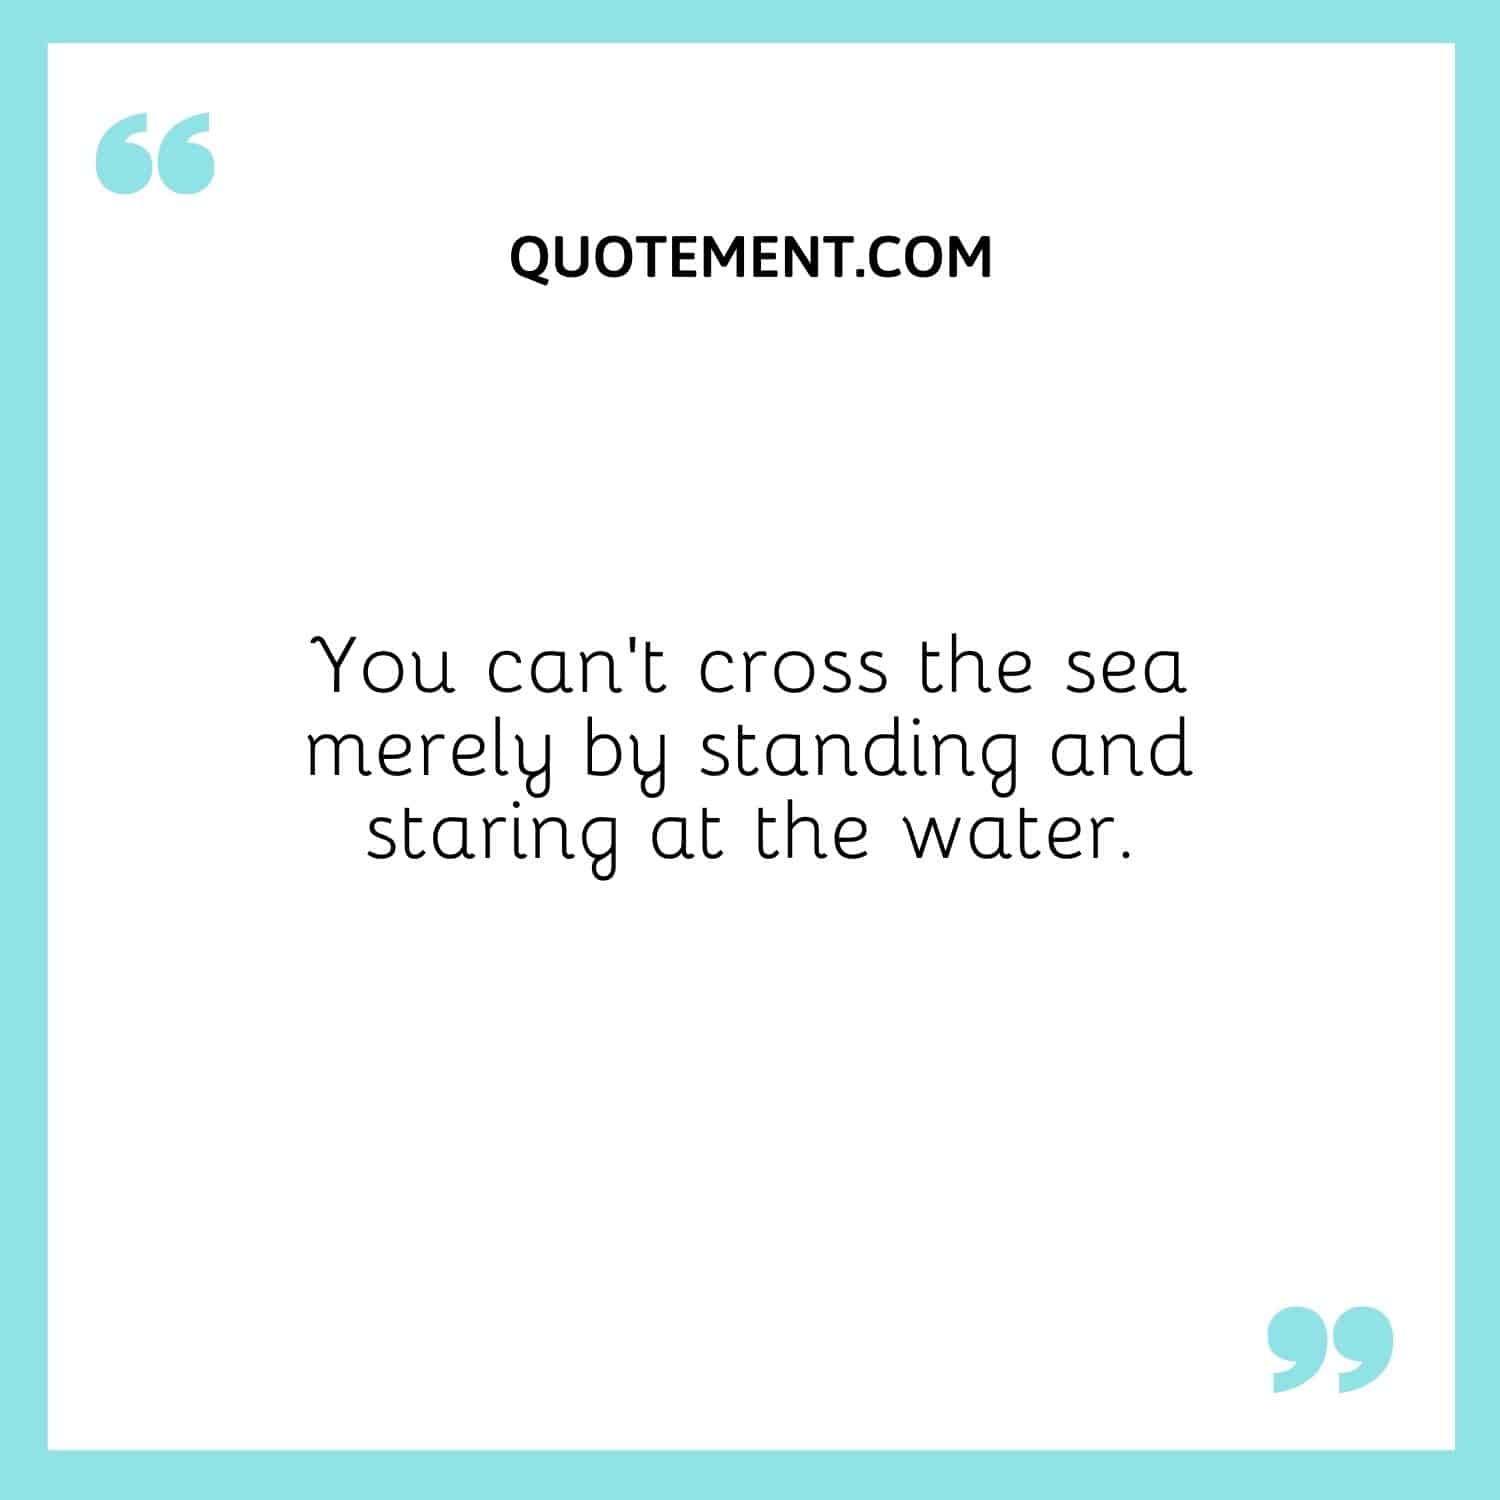 You can’t cross the sea merely by standing and staring at the water.